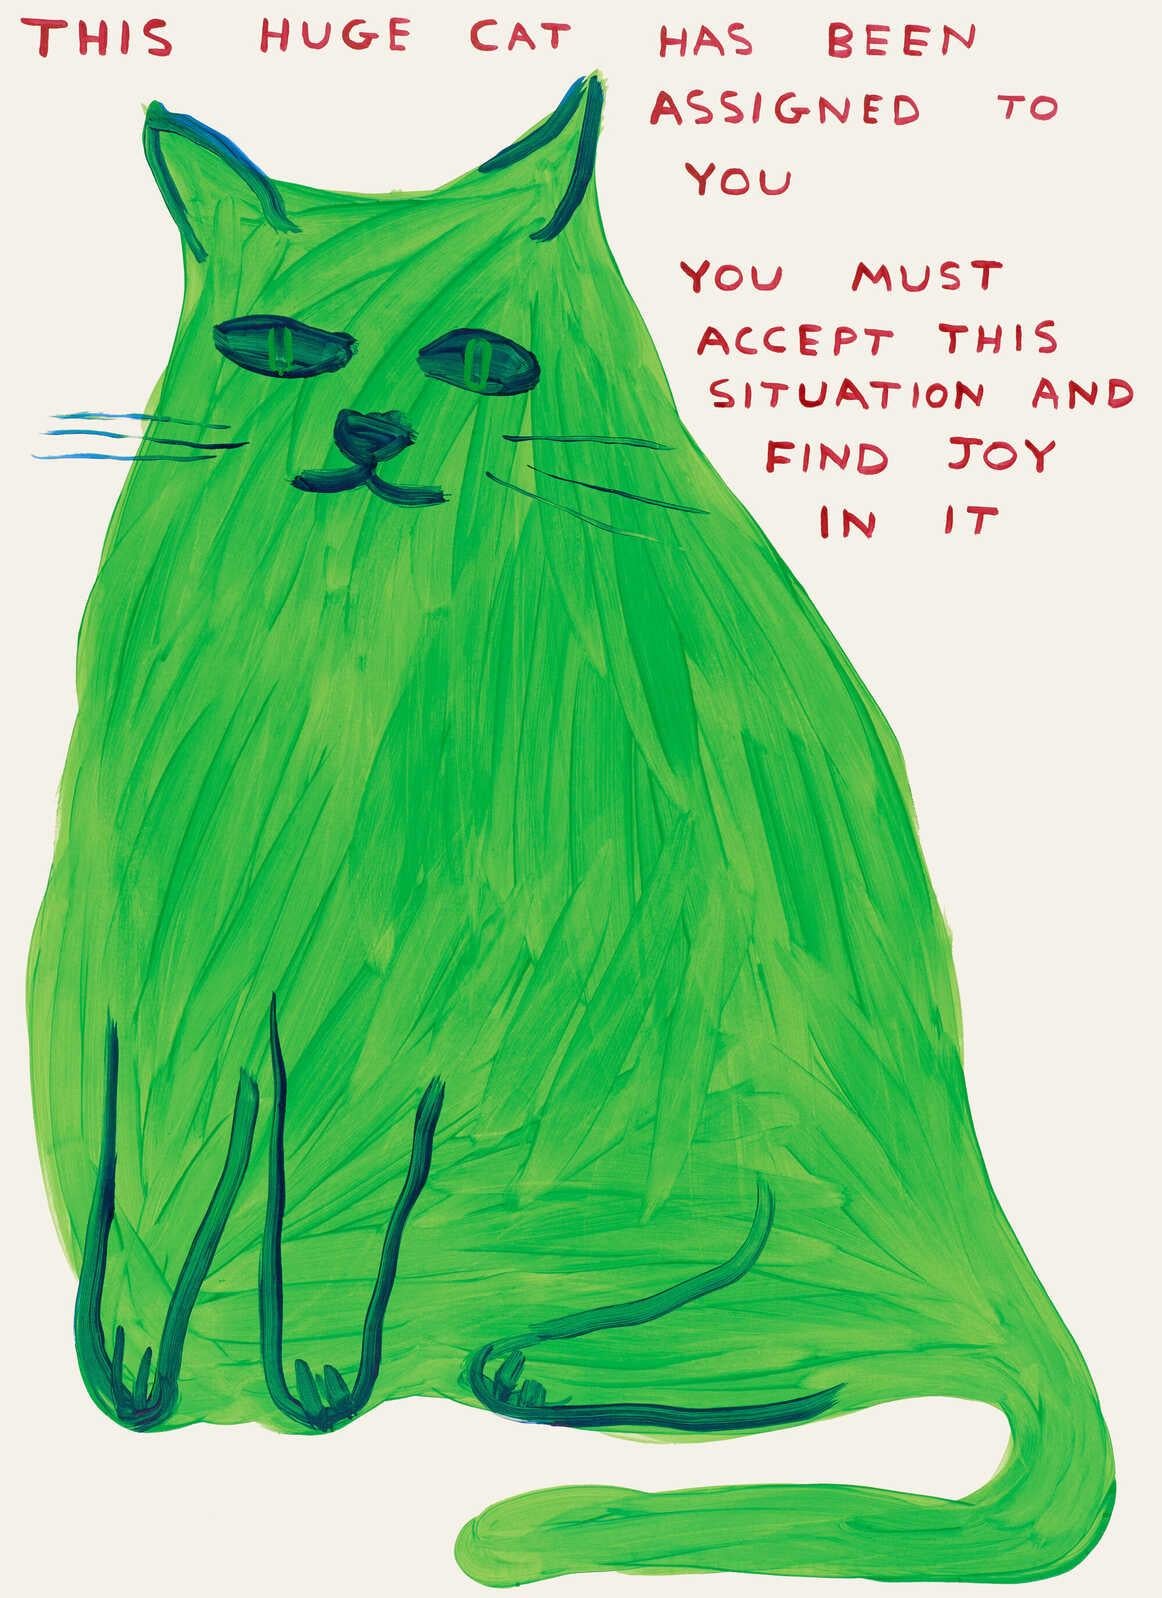 David Shrigley, This Huge Cat, 2023

Offset lithograph on 200 gsm Munken Lynx Paper
31 1/2 × 23 3/5 in (80 × 60 cm)

David Shrigley was born in 1968 in Macclesfield, UK. He lives and works in Brighton and Devon, UK. In January 2020 the artist was